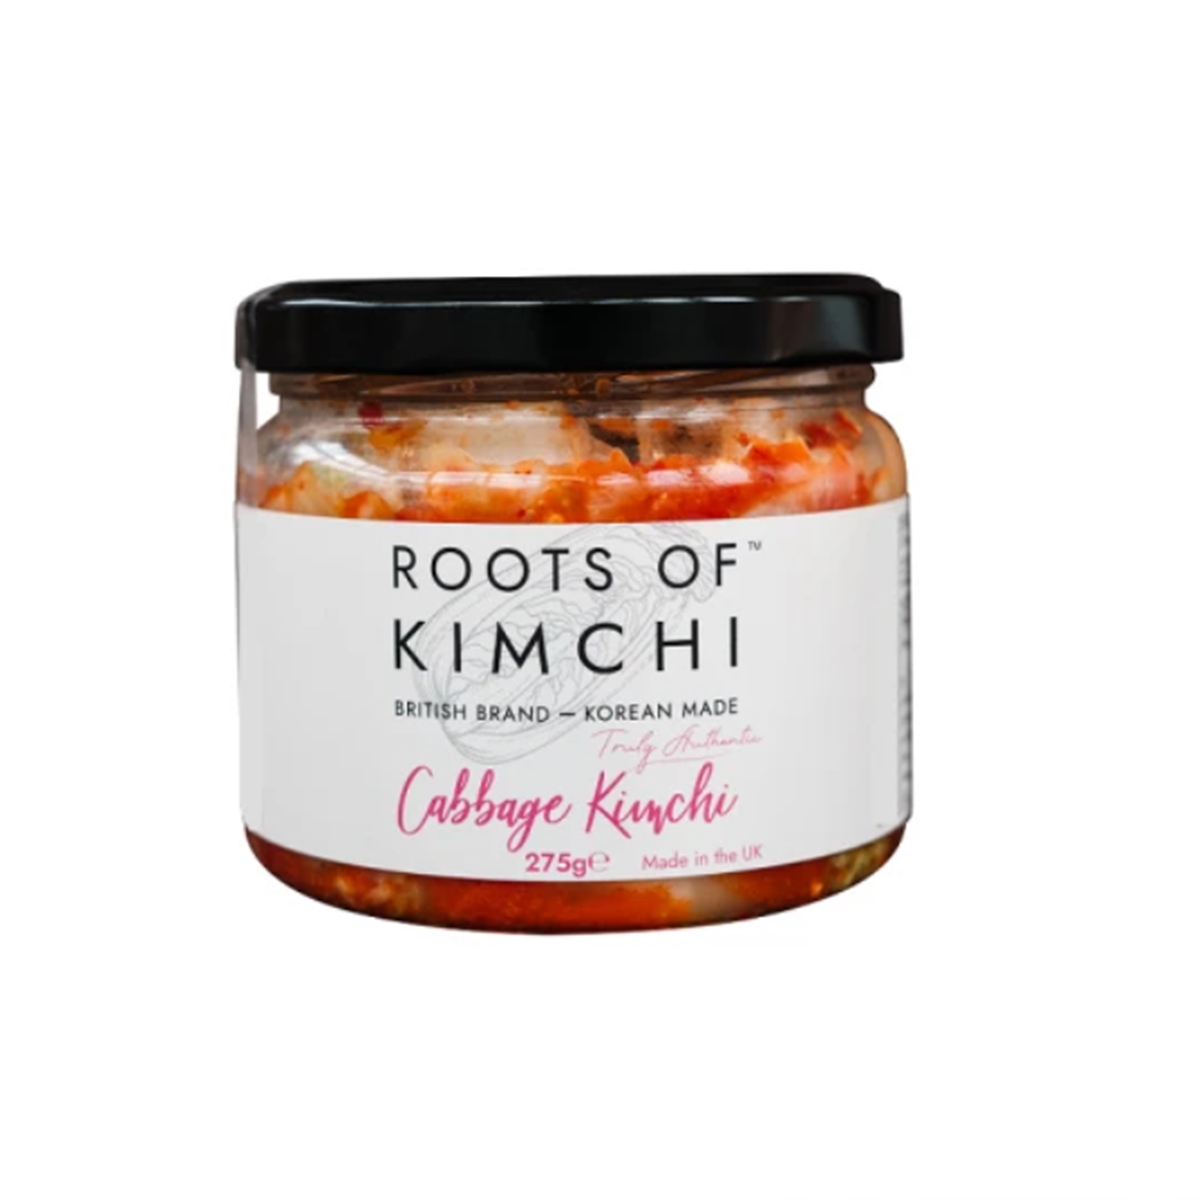 roots of kimchi